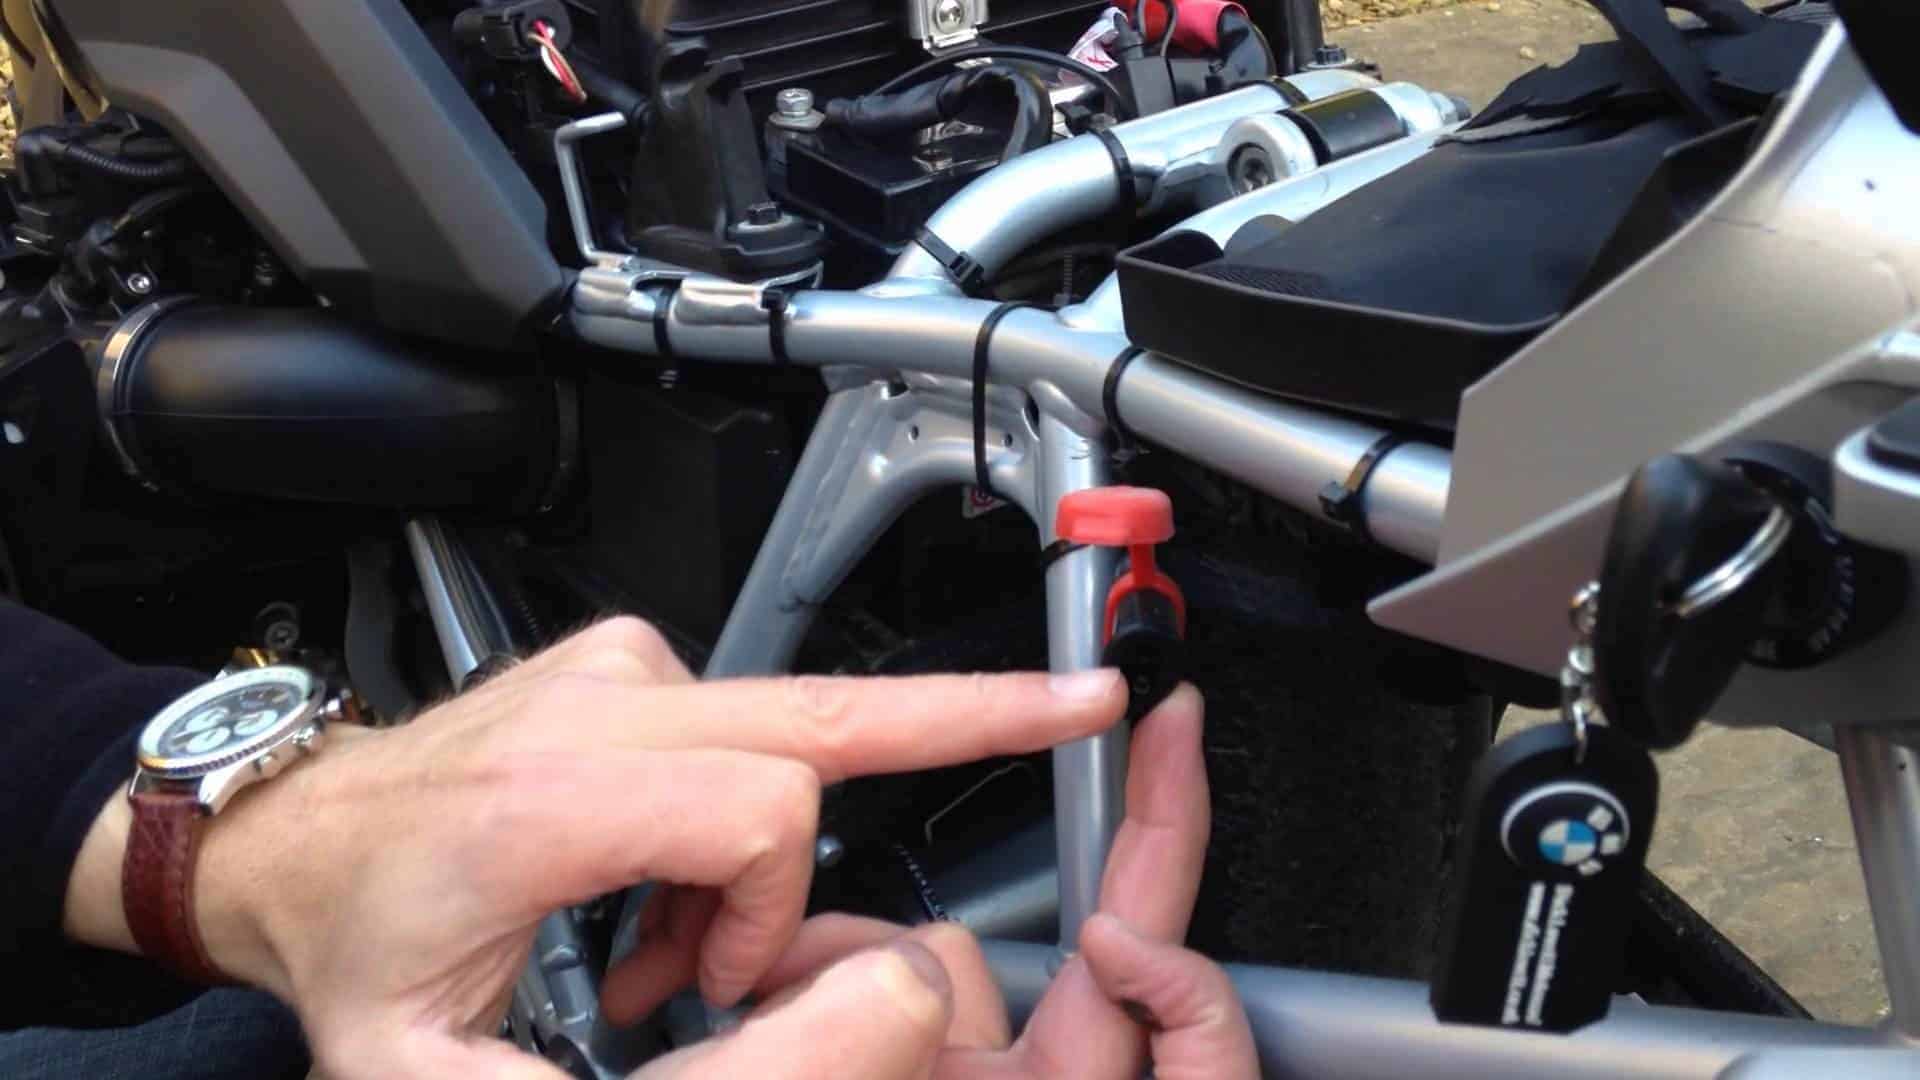 How Long Does It Take to Charge a Motorcycle Battery